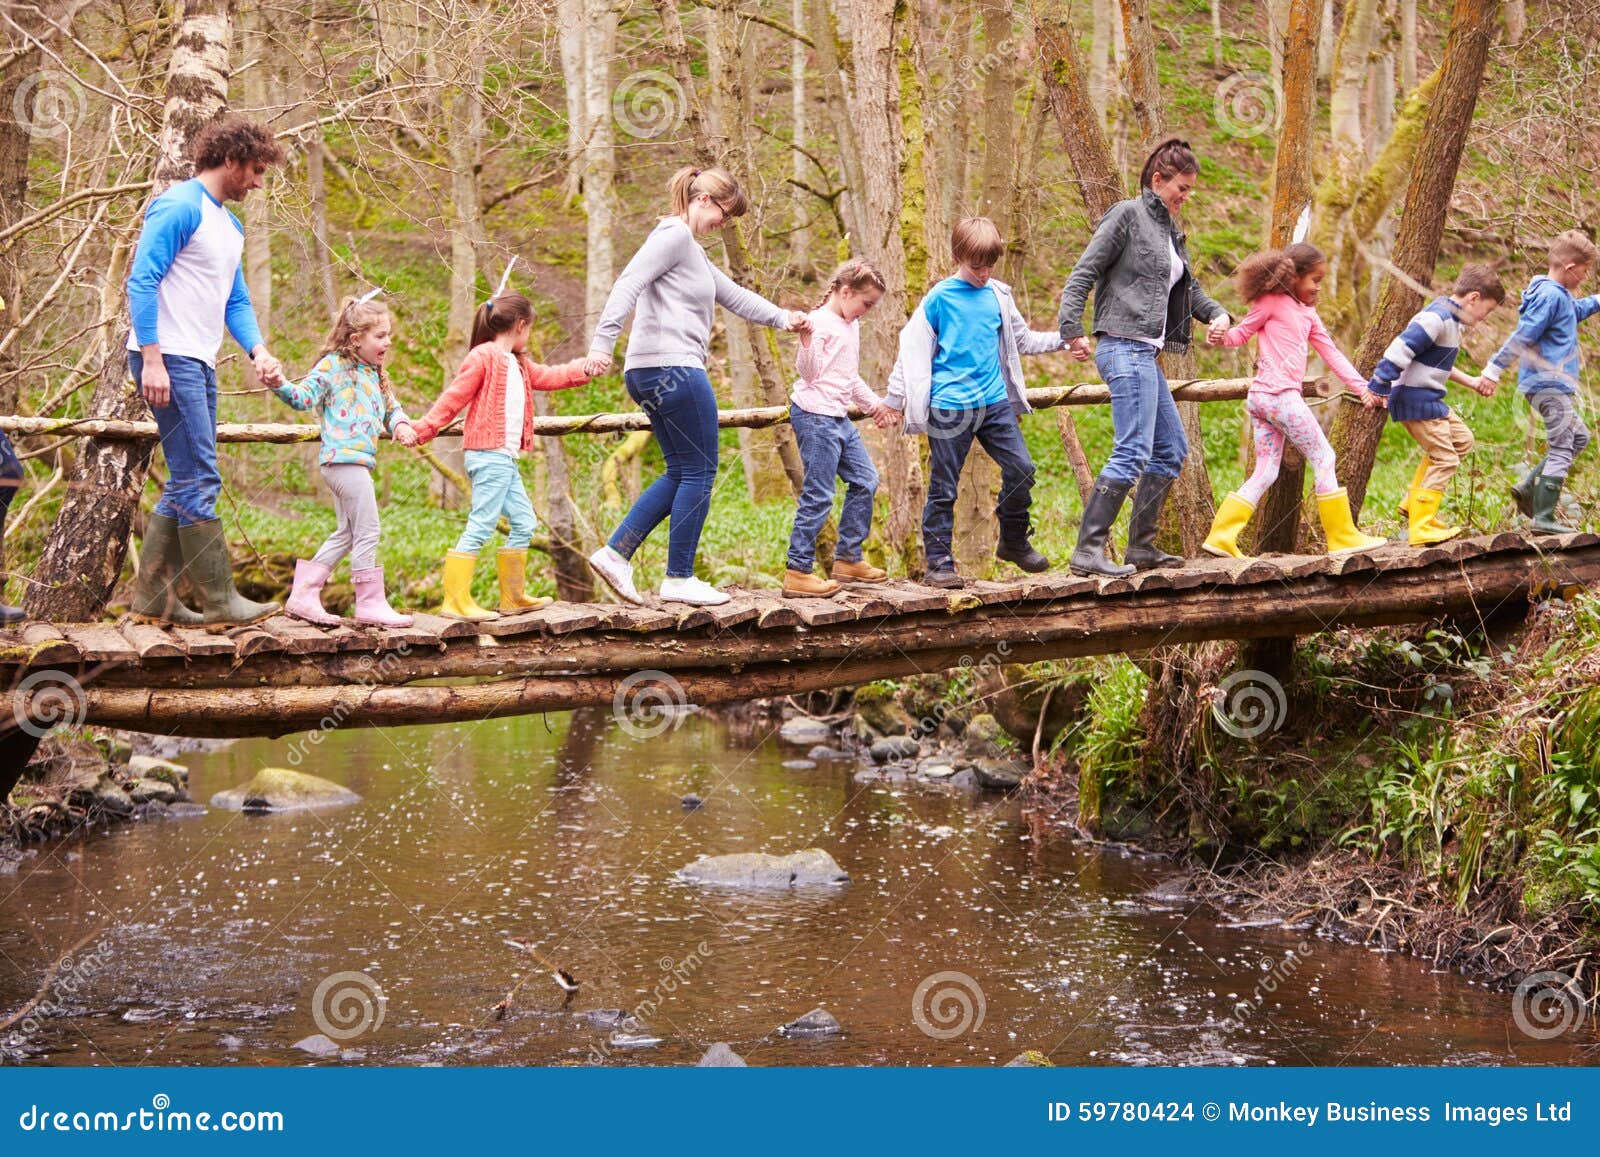 adults with children on bridge at outdoor activity centre